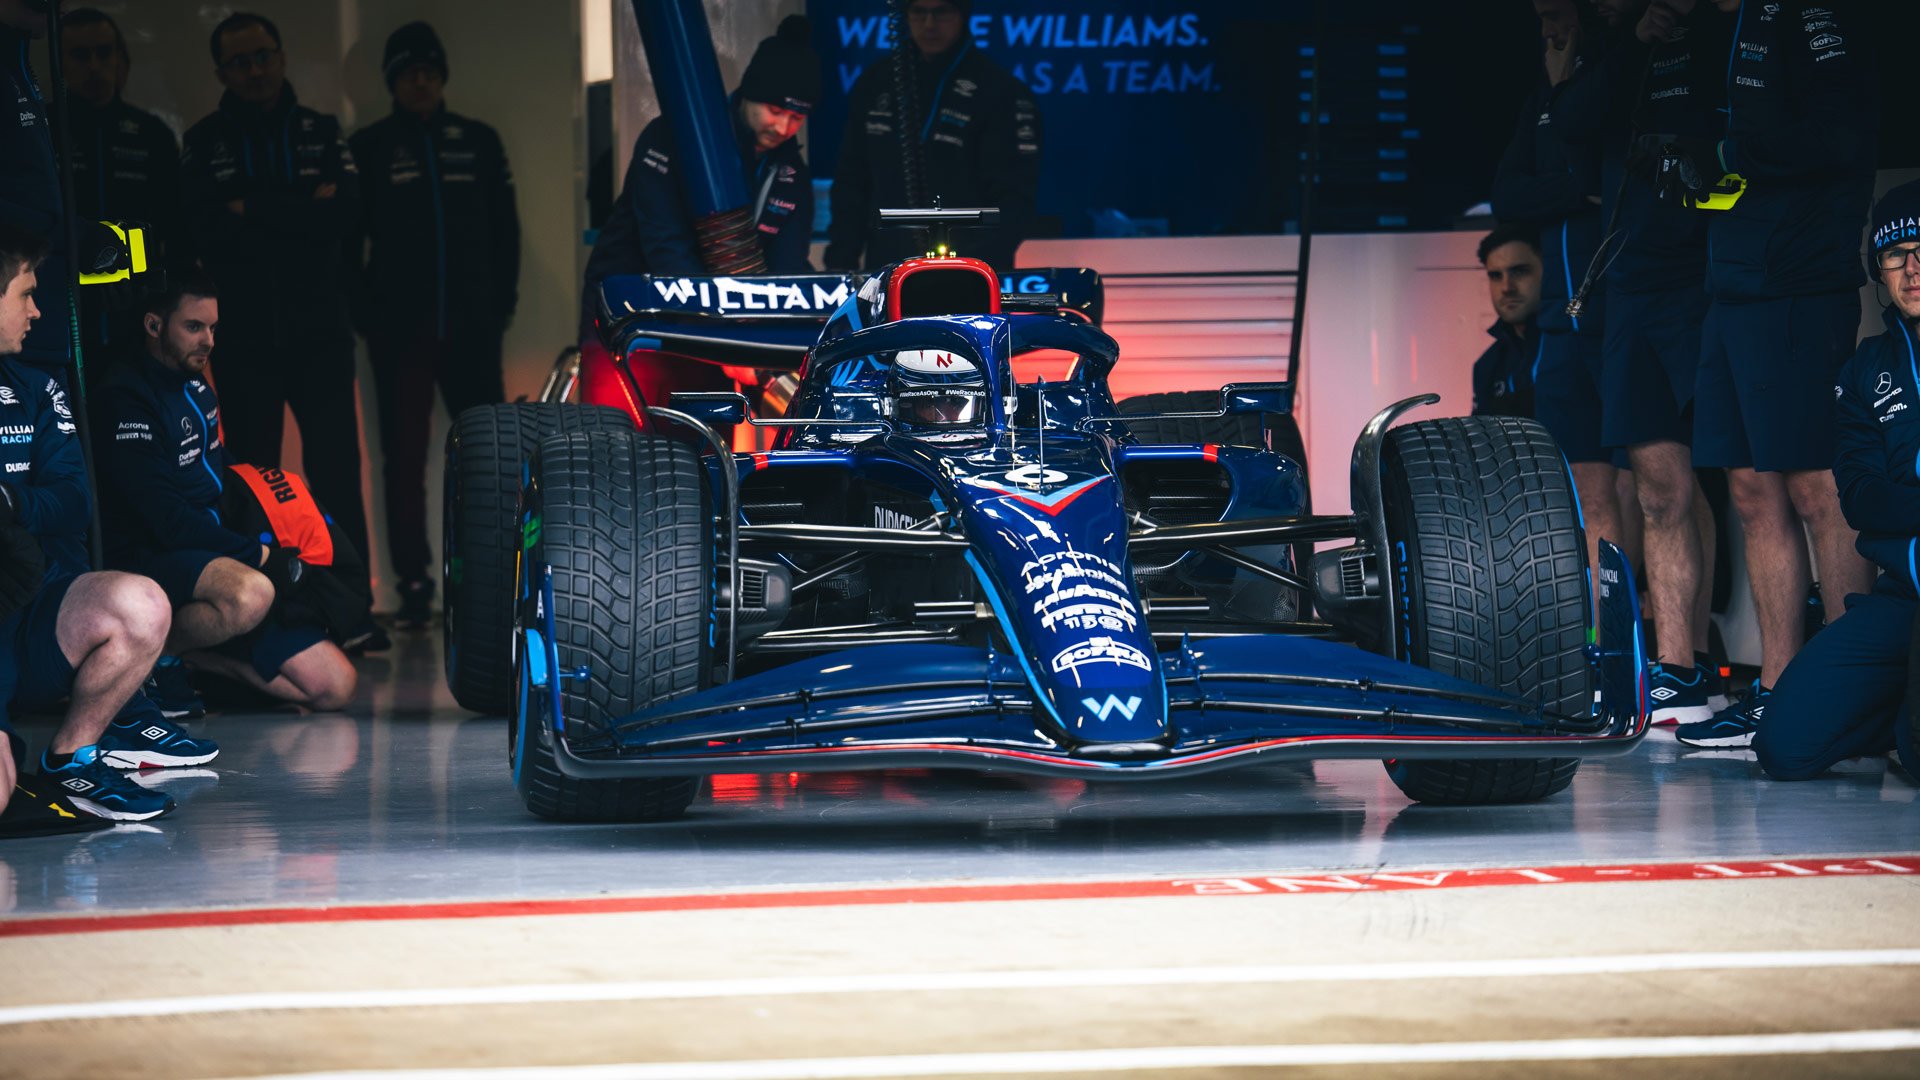 ANALYSIS: Williams forge their own path with FW44 design. Formula 1®